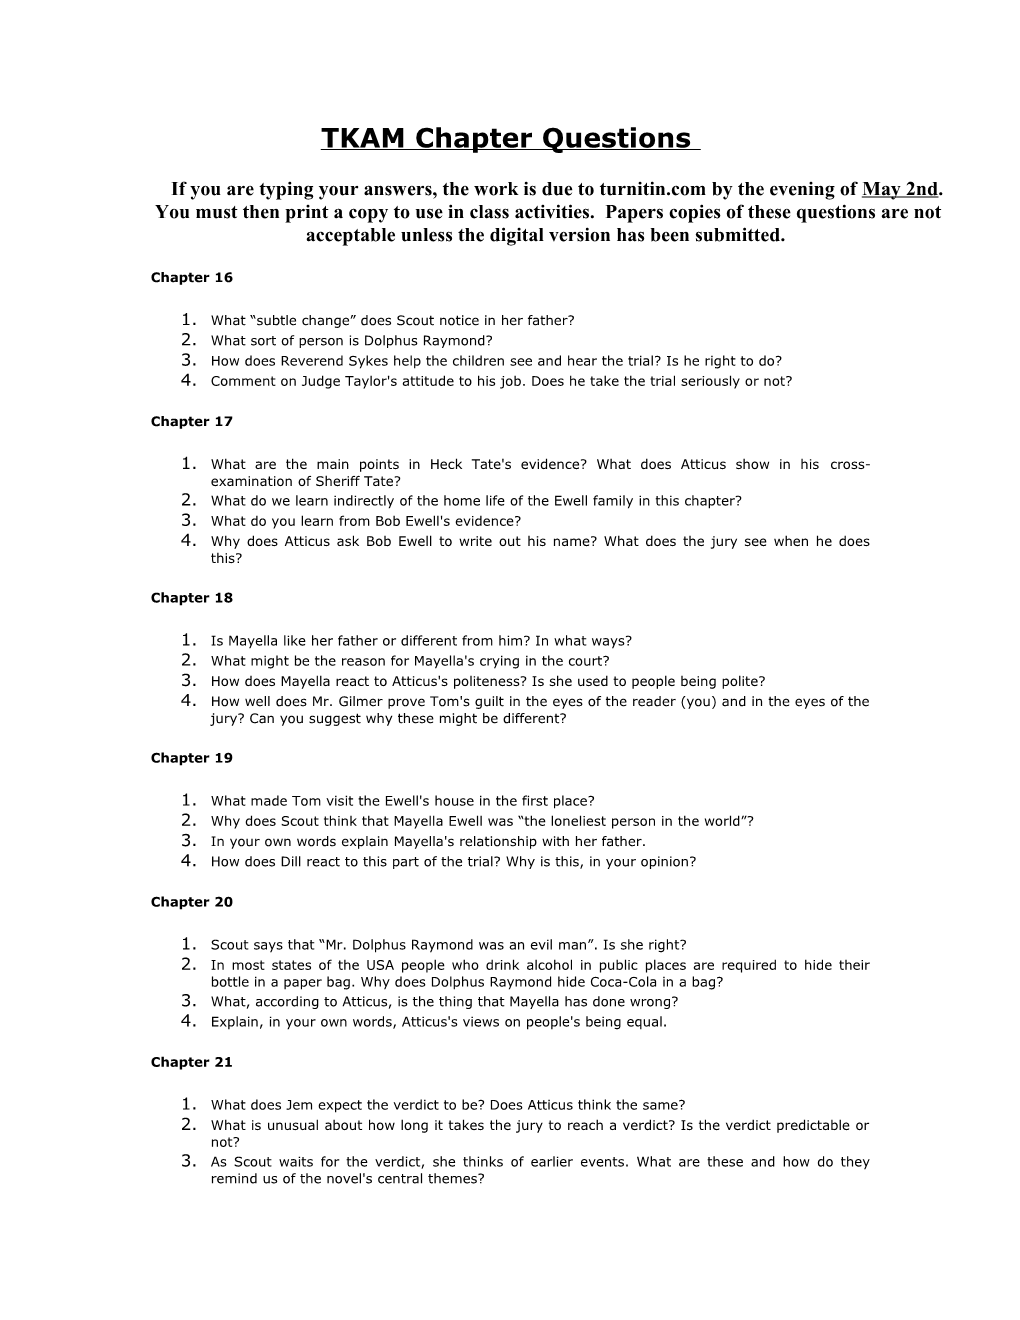 TKAM Chapter Questions (Courtesy Of